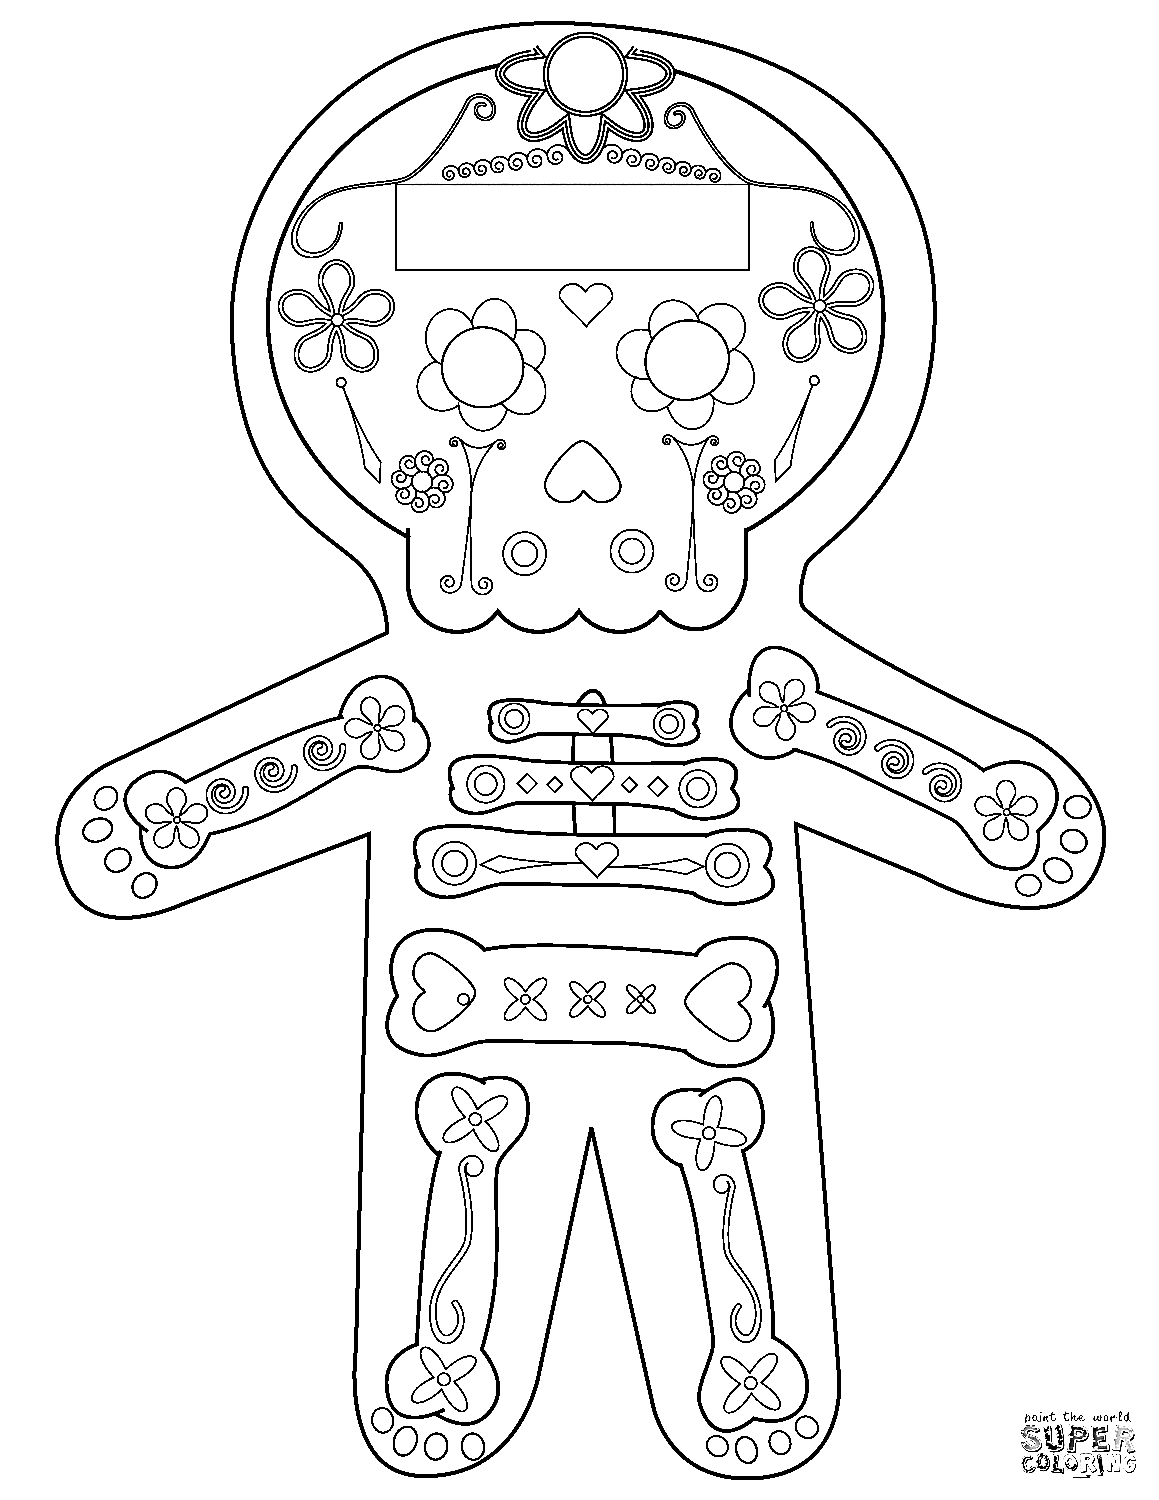 Skeleton Day of the Dead Coloring Page